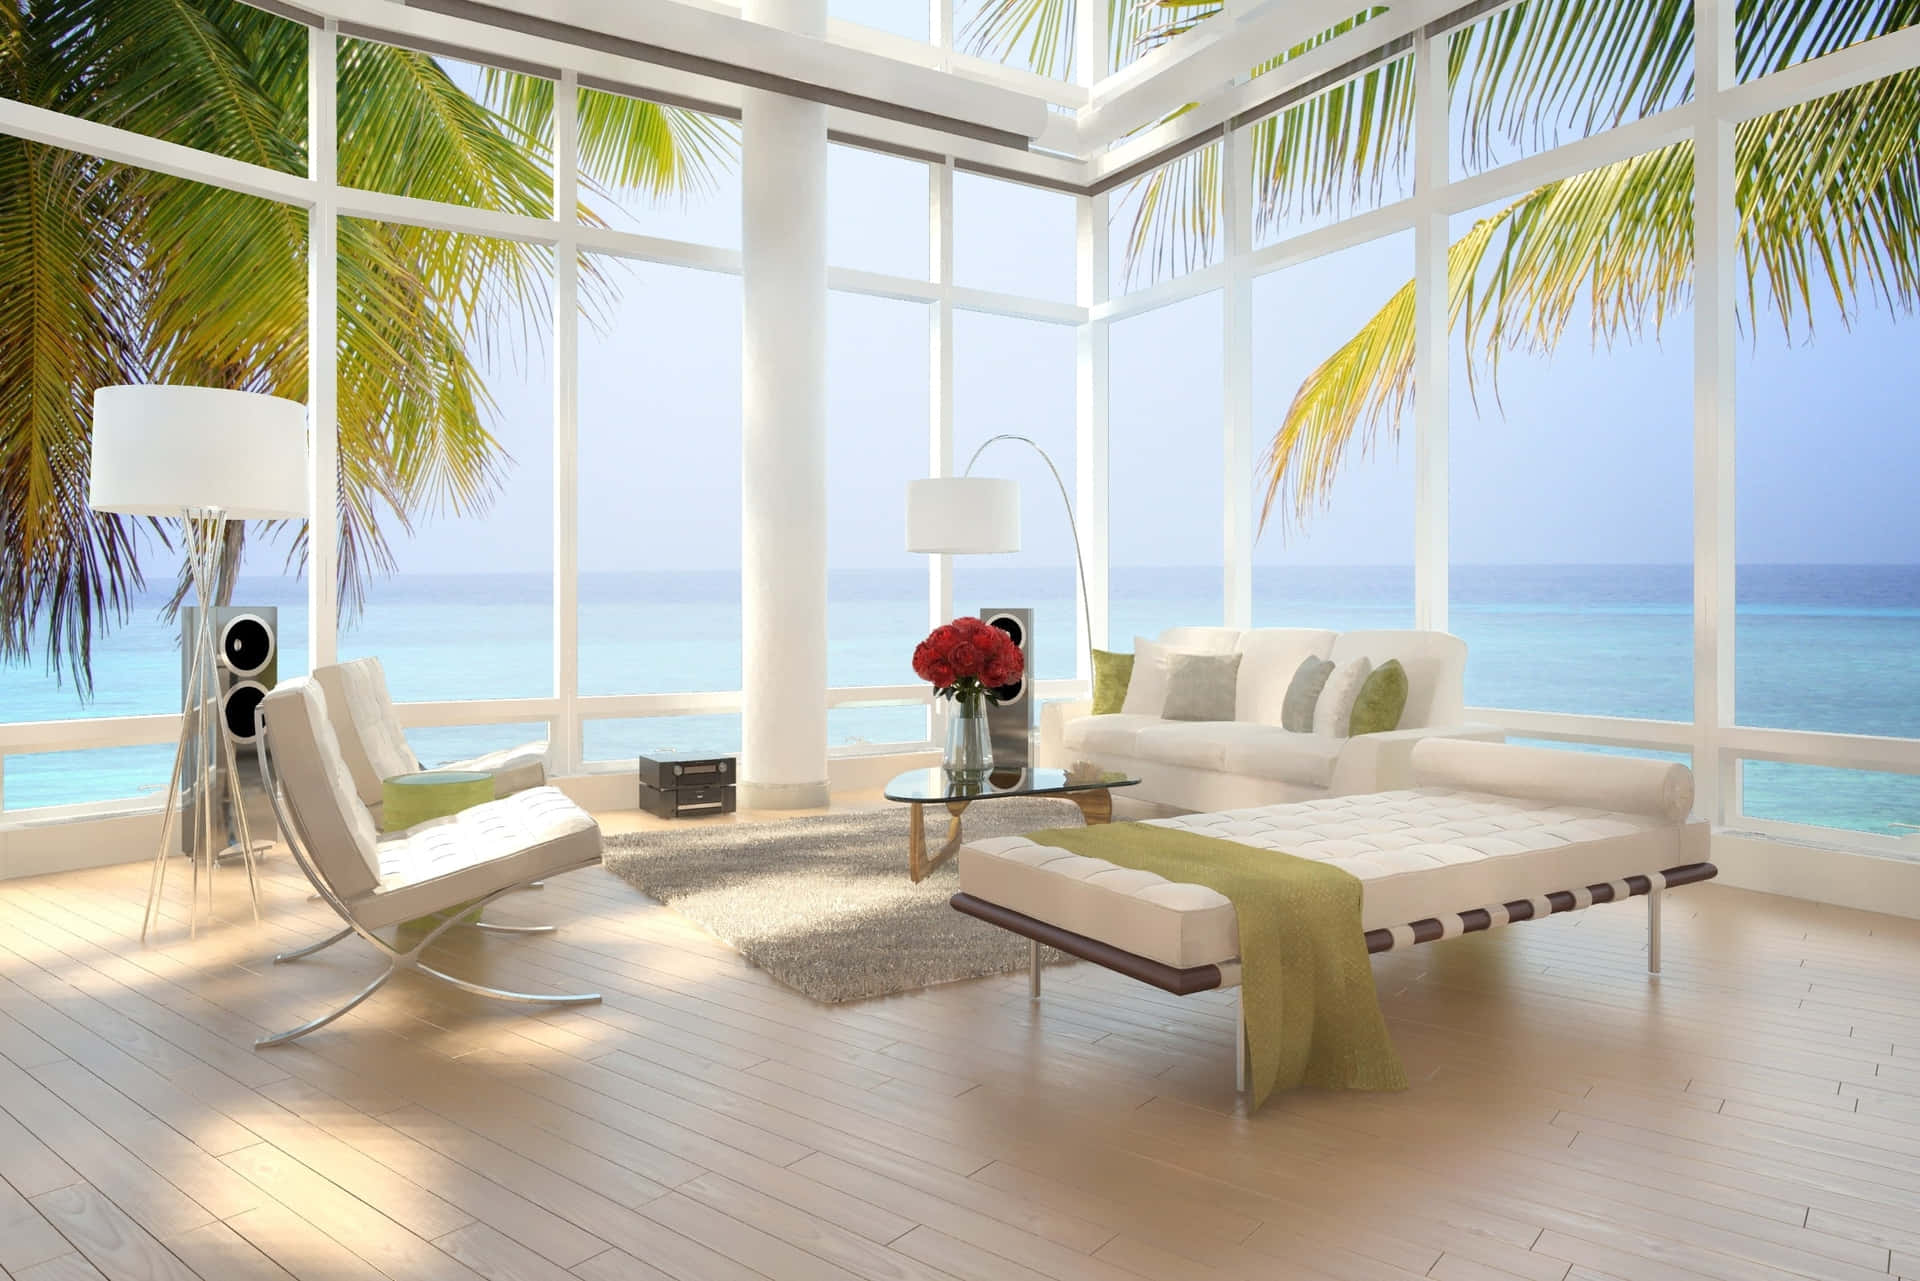 Relaxing Beach Daybed on a Sunny Coastal Getaway Wallpaper